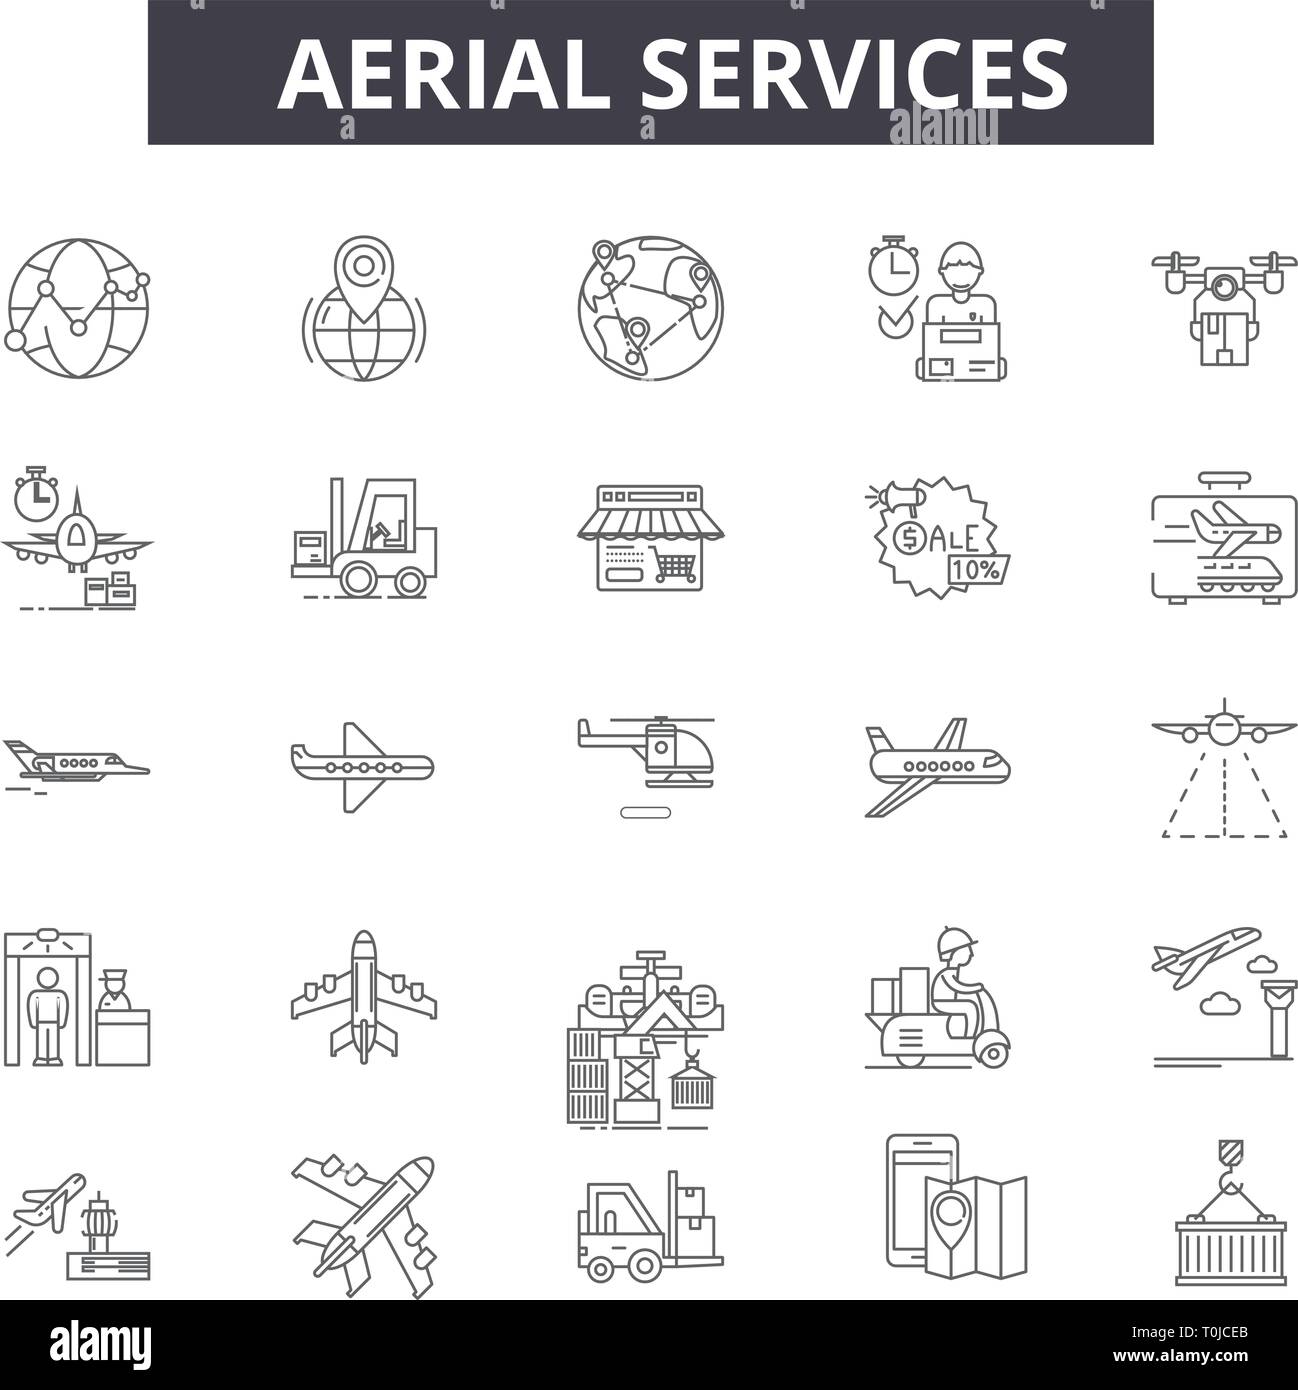 Aerial services line icons. Editable stroke signs. Concept icons: transportation, industrial trandport, airport, carrier etc. Aerial services outline Stock Vector